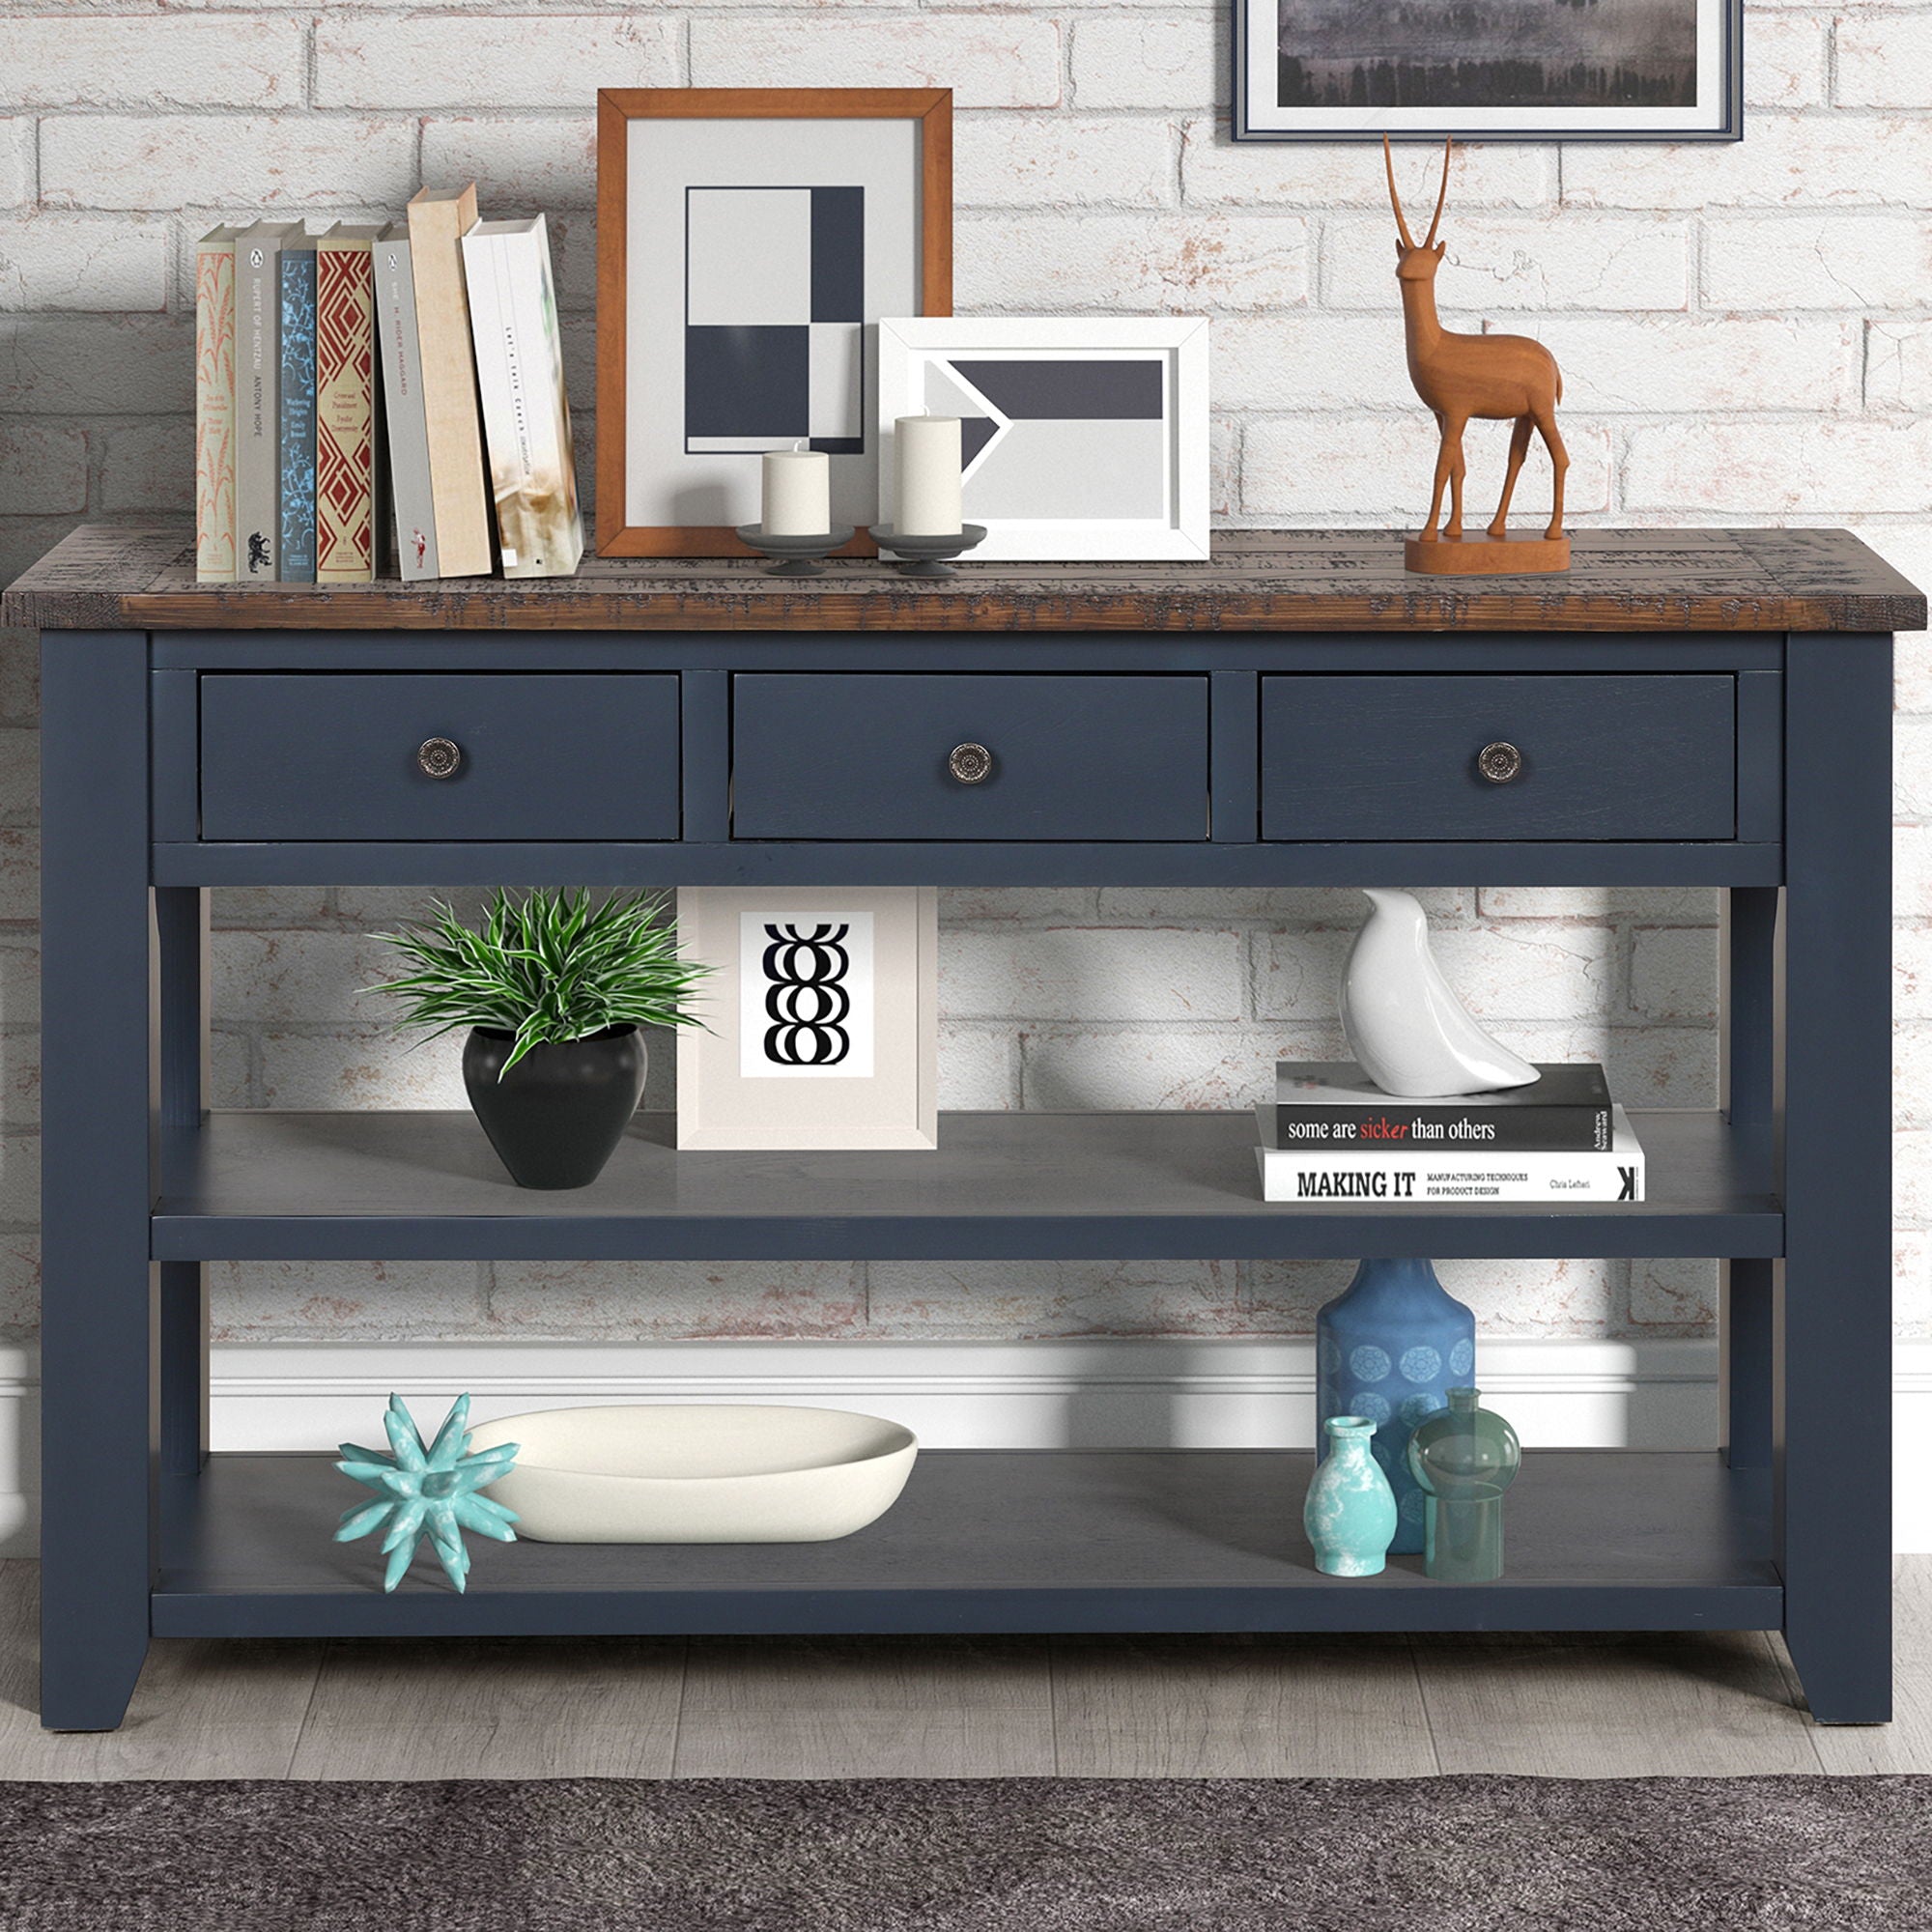 48'' Solid Pine Wood Top Console Table, Modern Entryway Sofa Side Table With 3 Storage Drawers And 2 Shelves. Easy To Assemble (Blue)